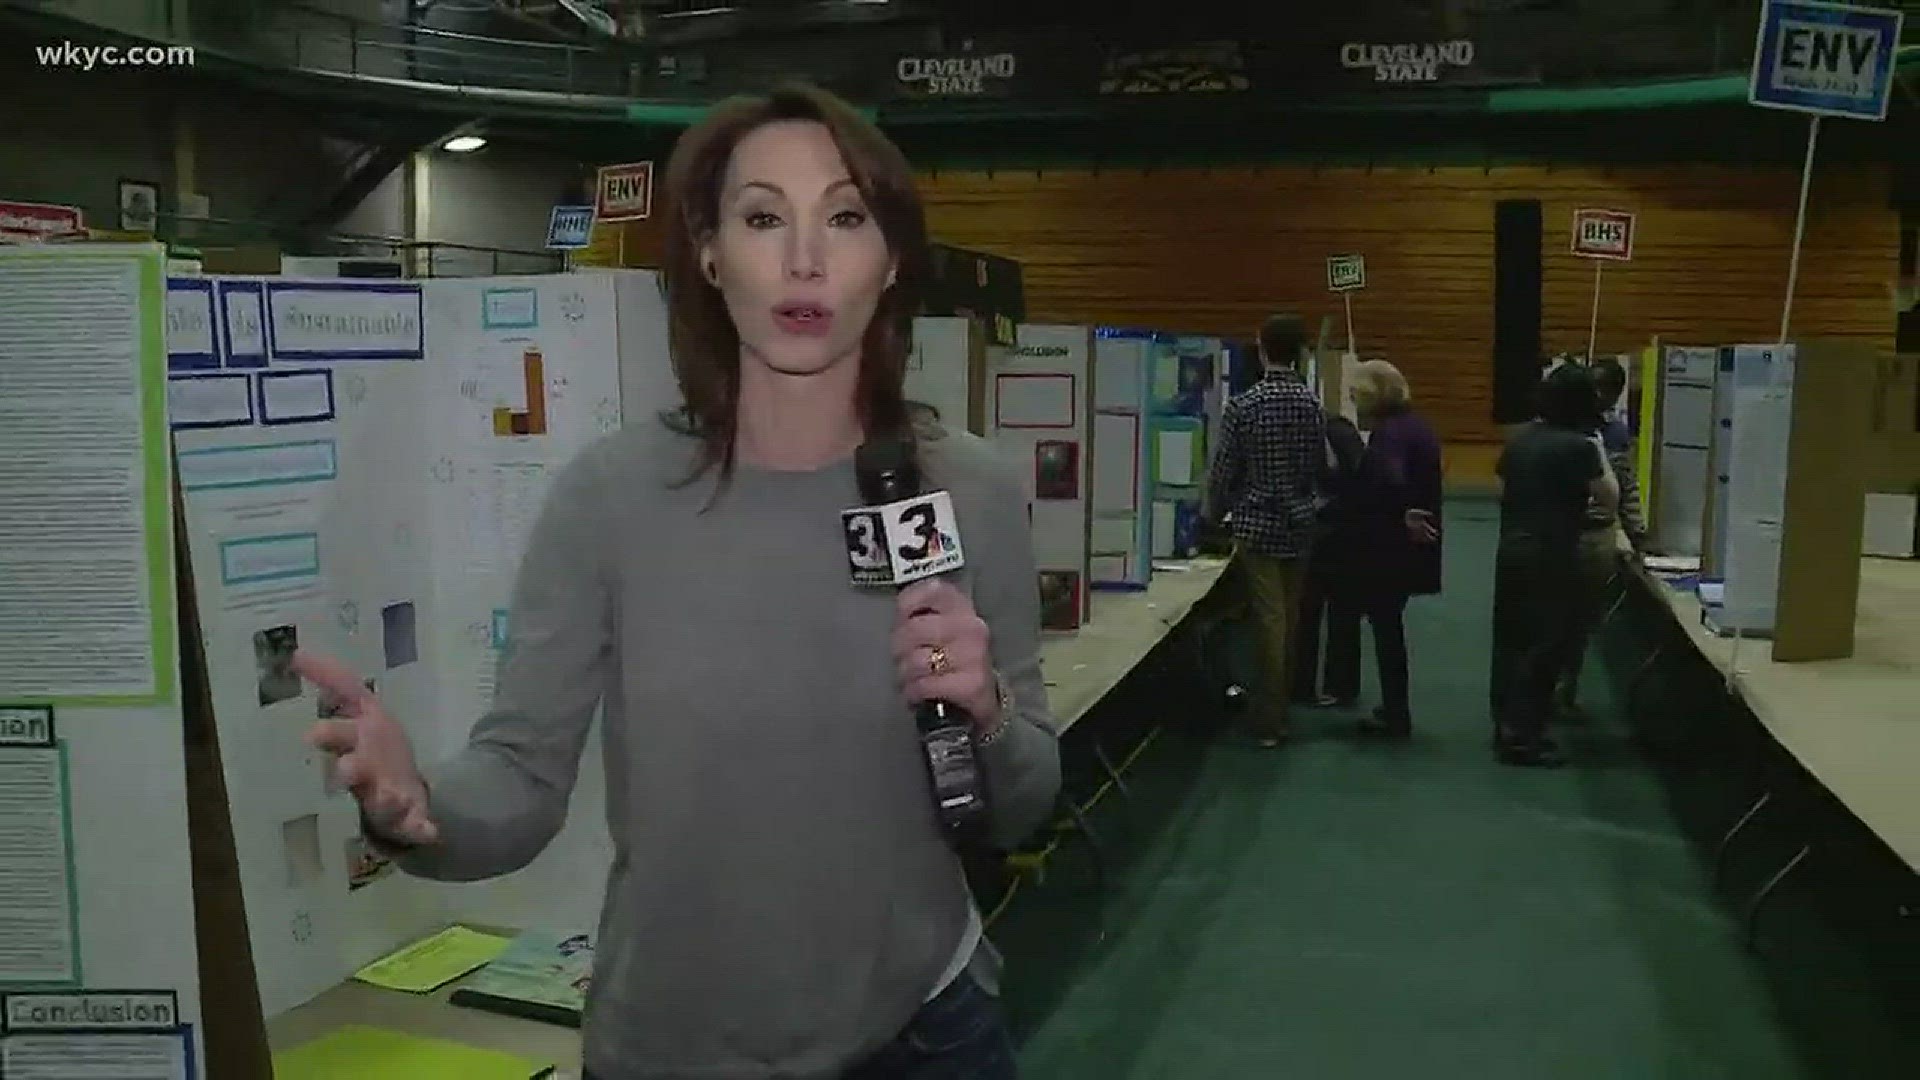 WKYC chief meteorologist Betsy Kling reports live from the CSU Science Fair.